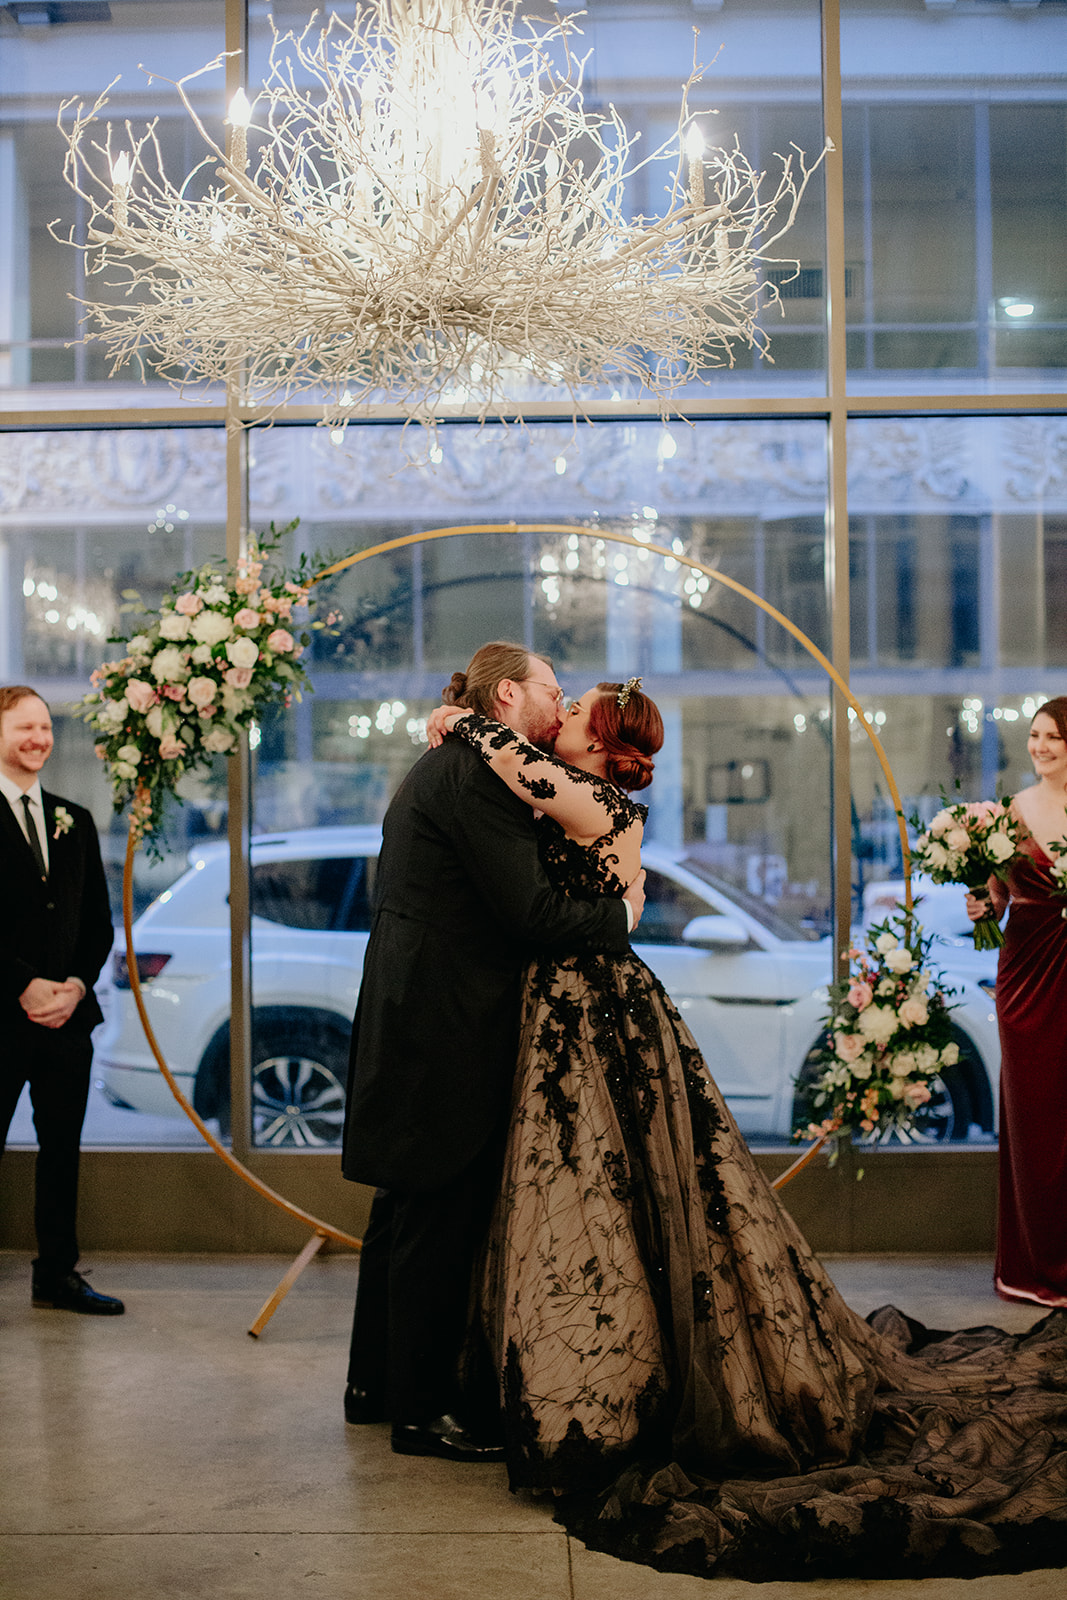 A couple shares their first kiss as they marry under twinkling lights